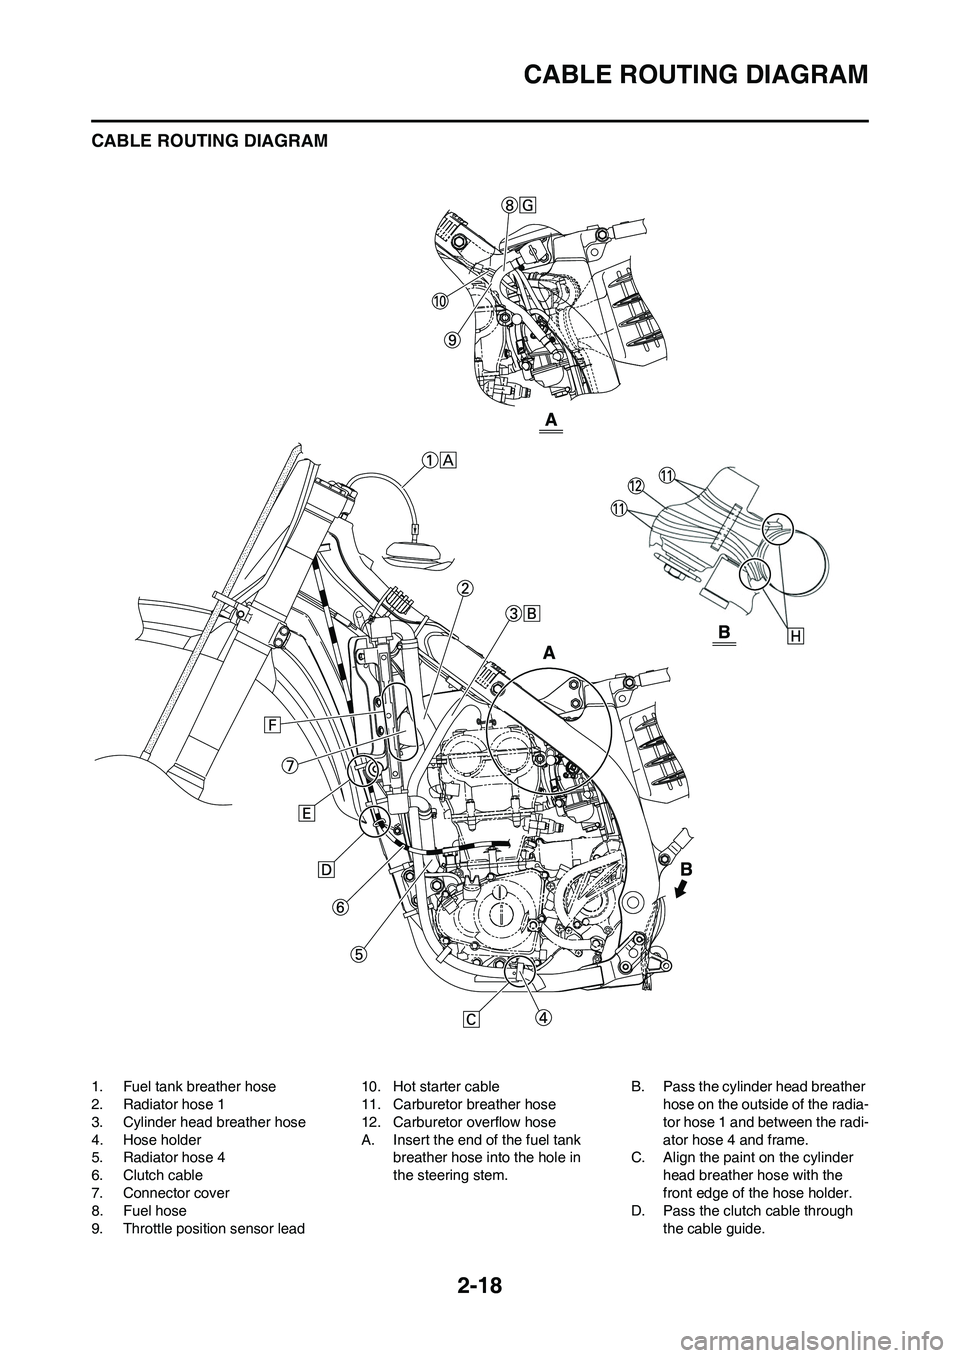 YAMAHA YZ450F 2009 Owners Guide 2-18
CABLE ROUTING DIAGRAM
CABLE ROUTING DIAGRAM
1. Fuel tank breather hose
2. Radiator hose 1
3. Cylinder head breather hose
4. Hose holder
5. Radiator hose 4
6. Clutch cable
7. Connector cover
8. Fu